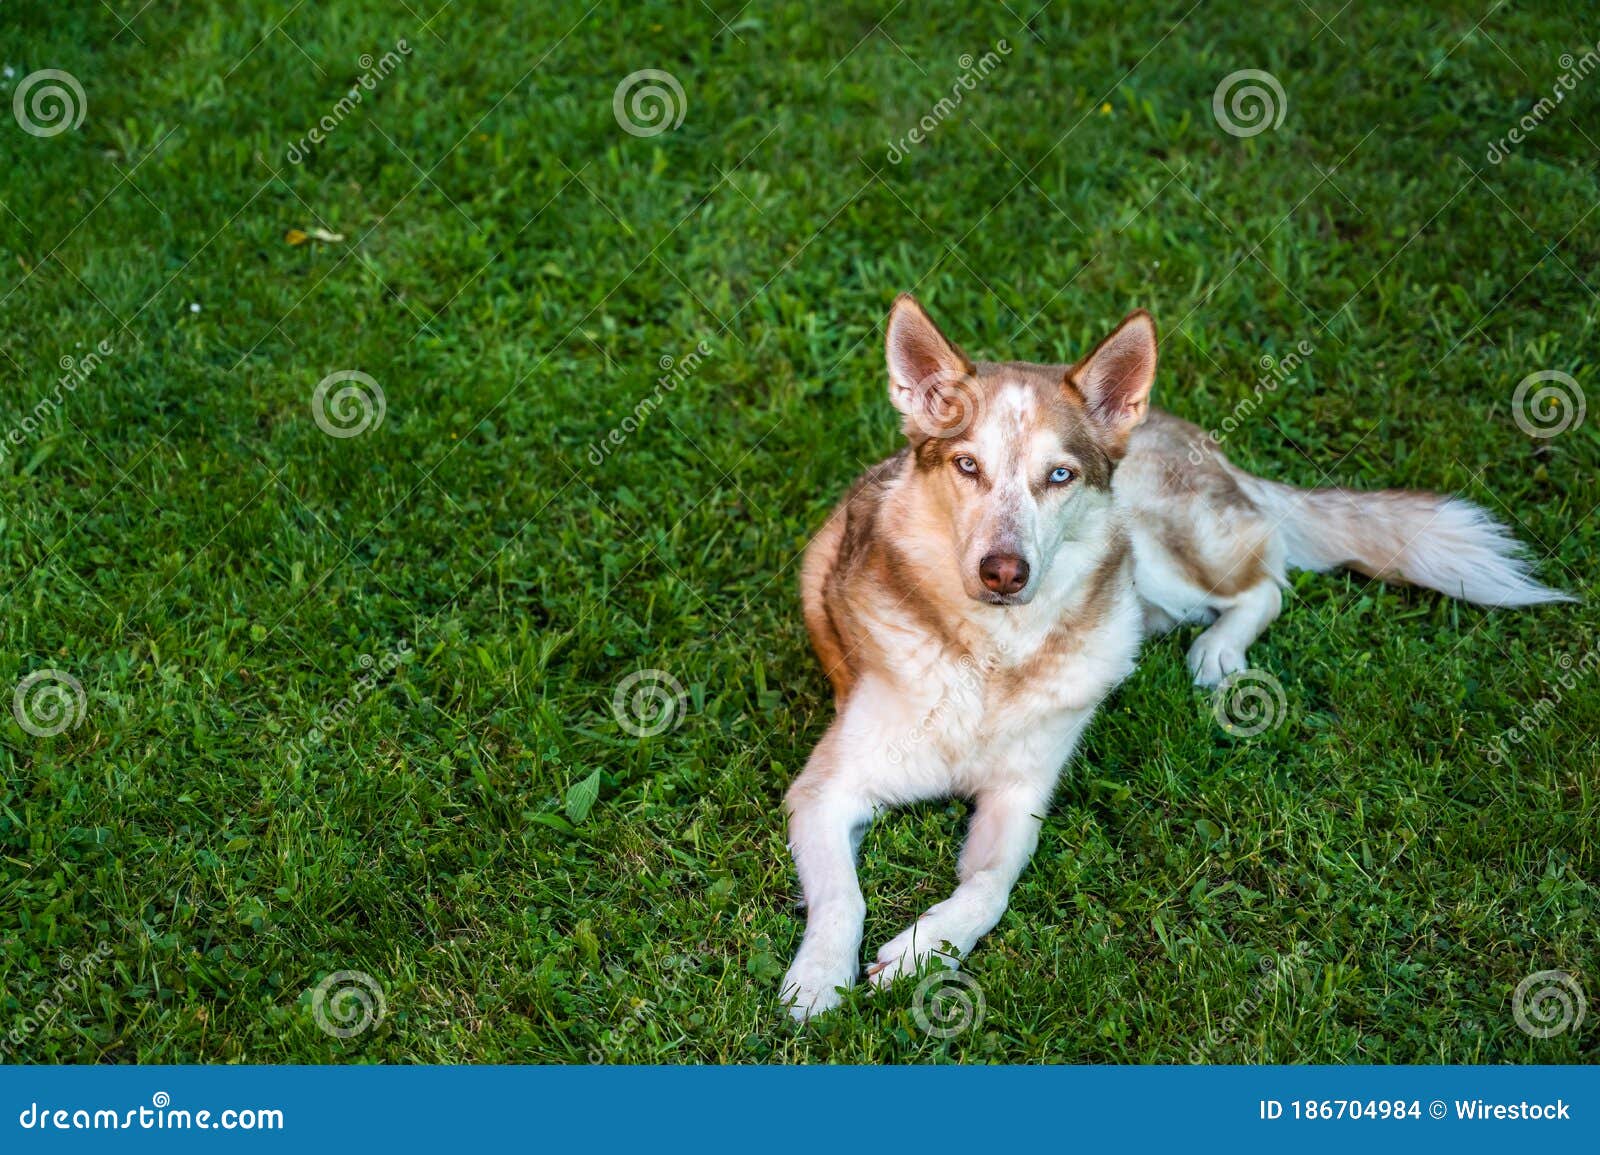 High Angle Shot Of A Brown Saarloos Wolfdog Lying On The Ground Covered In The Grass At Daytime Stock Photo Image Of Strength Breed 186704984